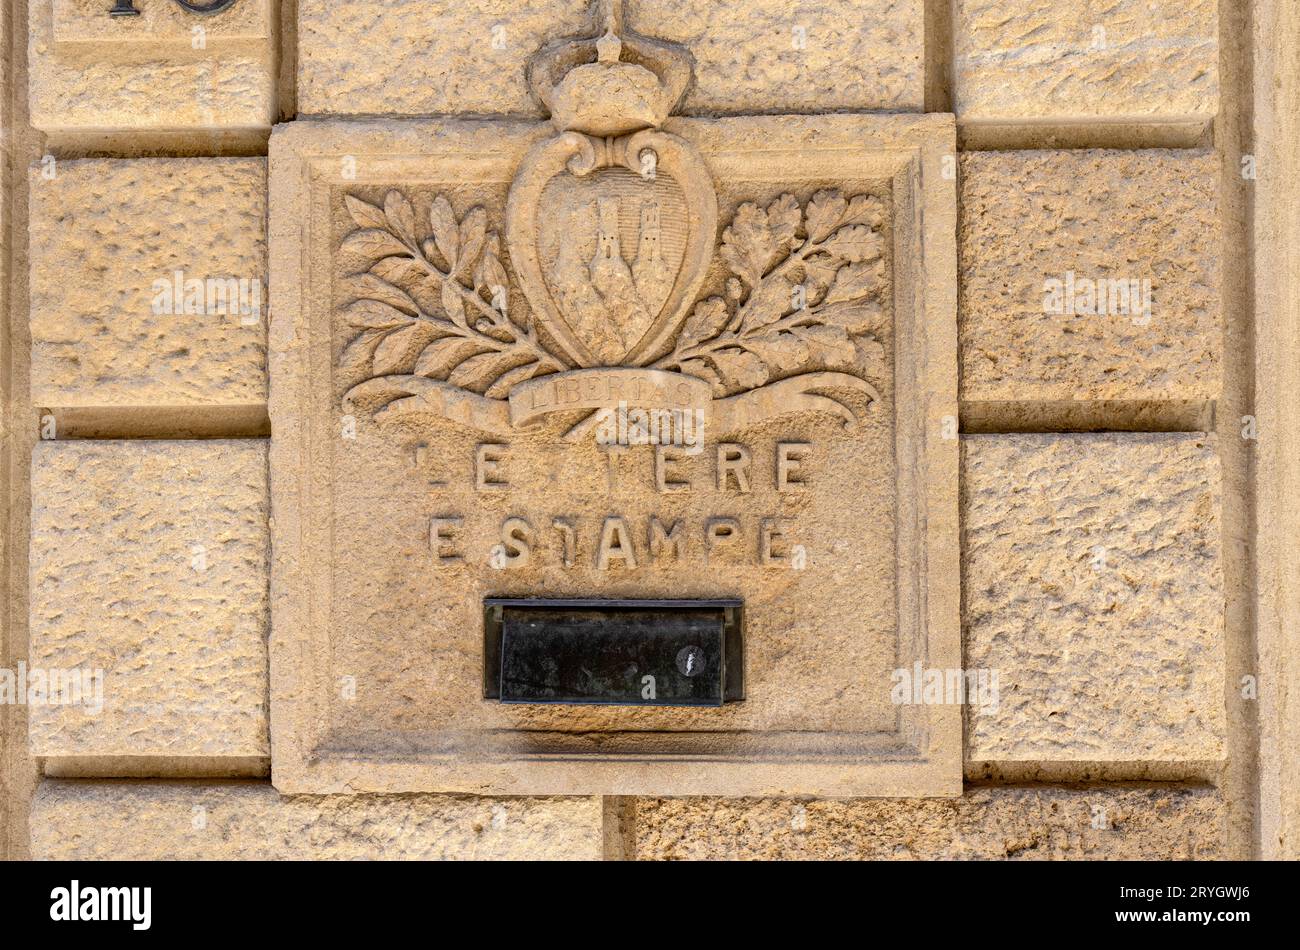 SAN MARINO, JULY 5 , 2022 - An ancient stone letterbox in the town center of San Marino, Europe Stock Photo